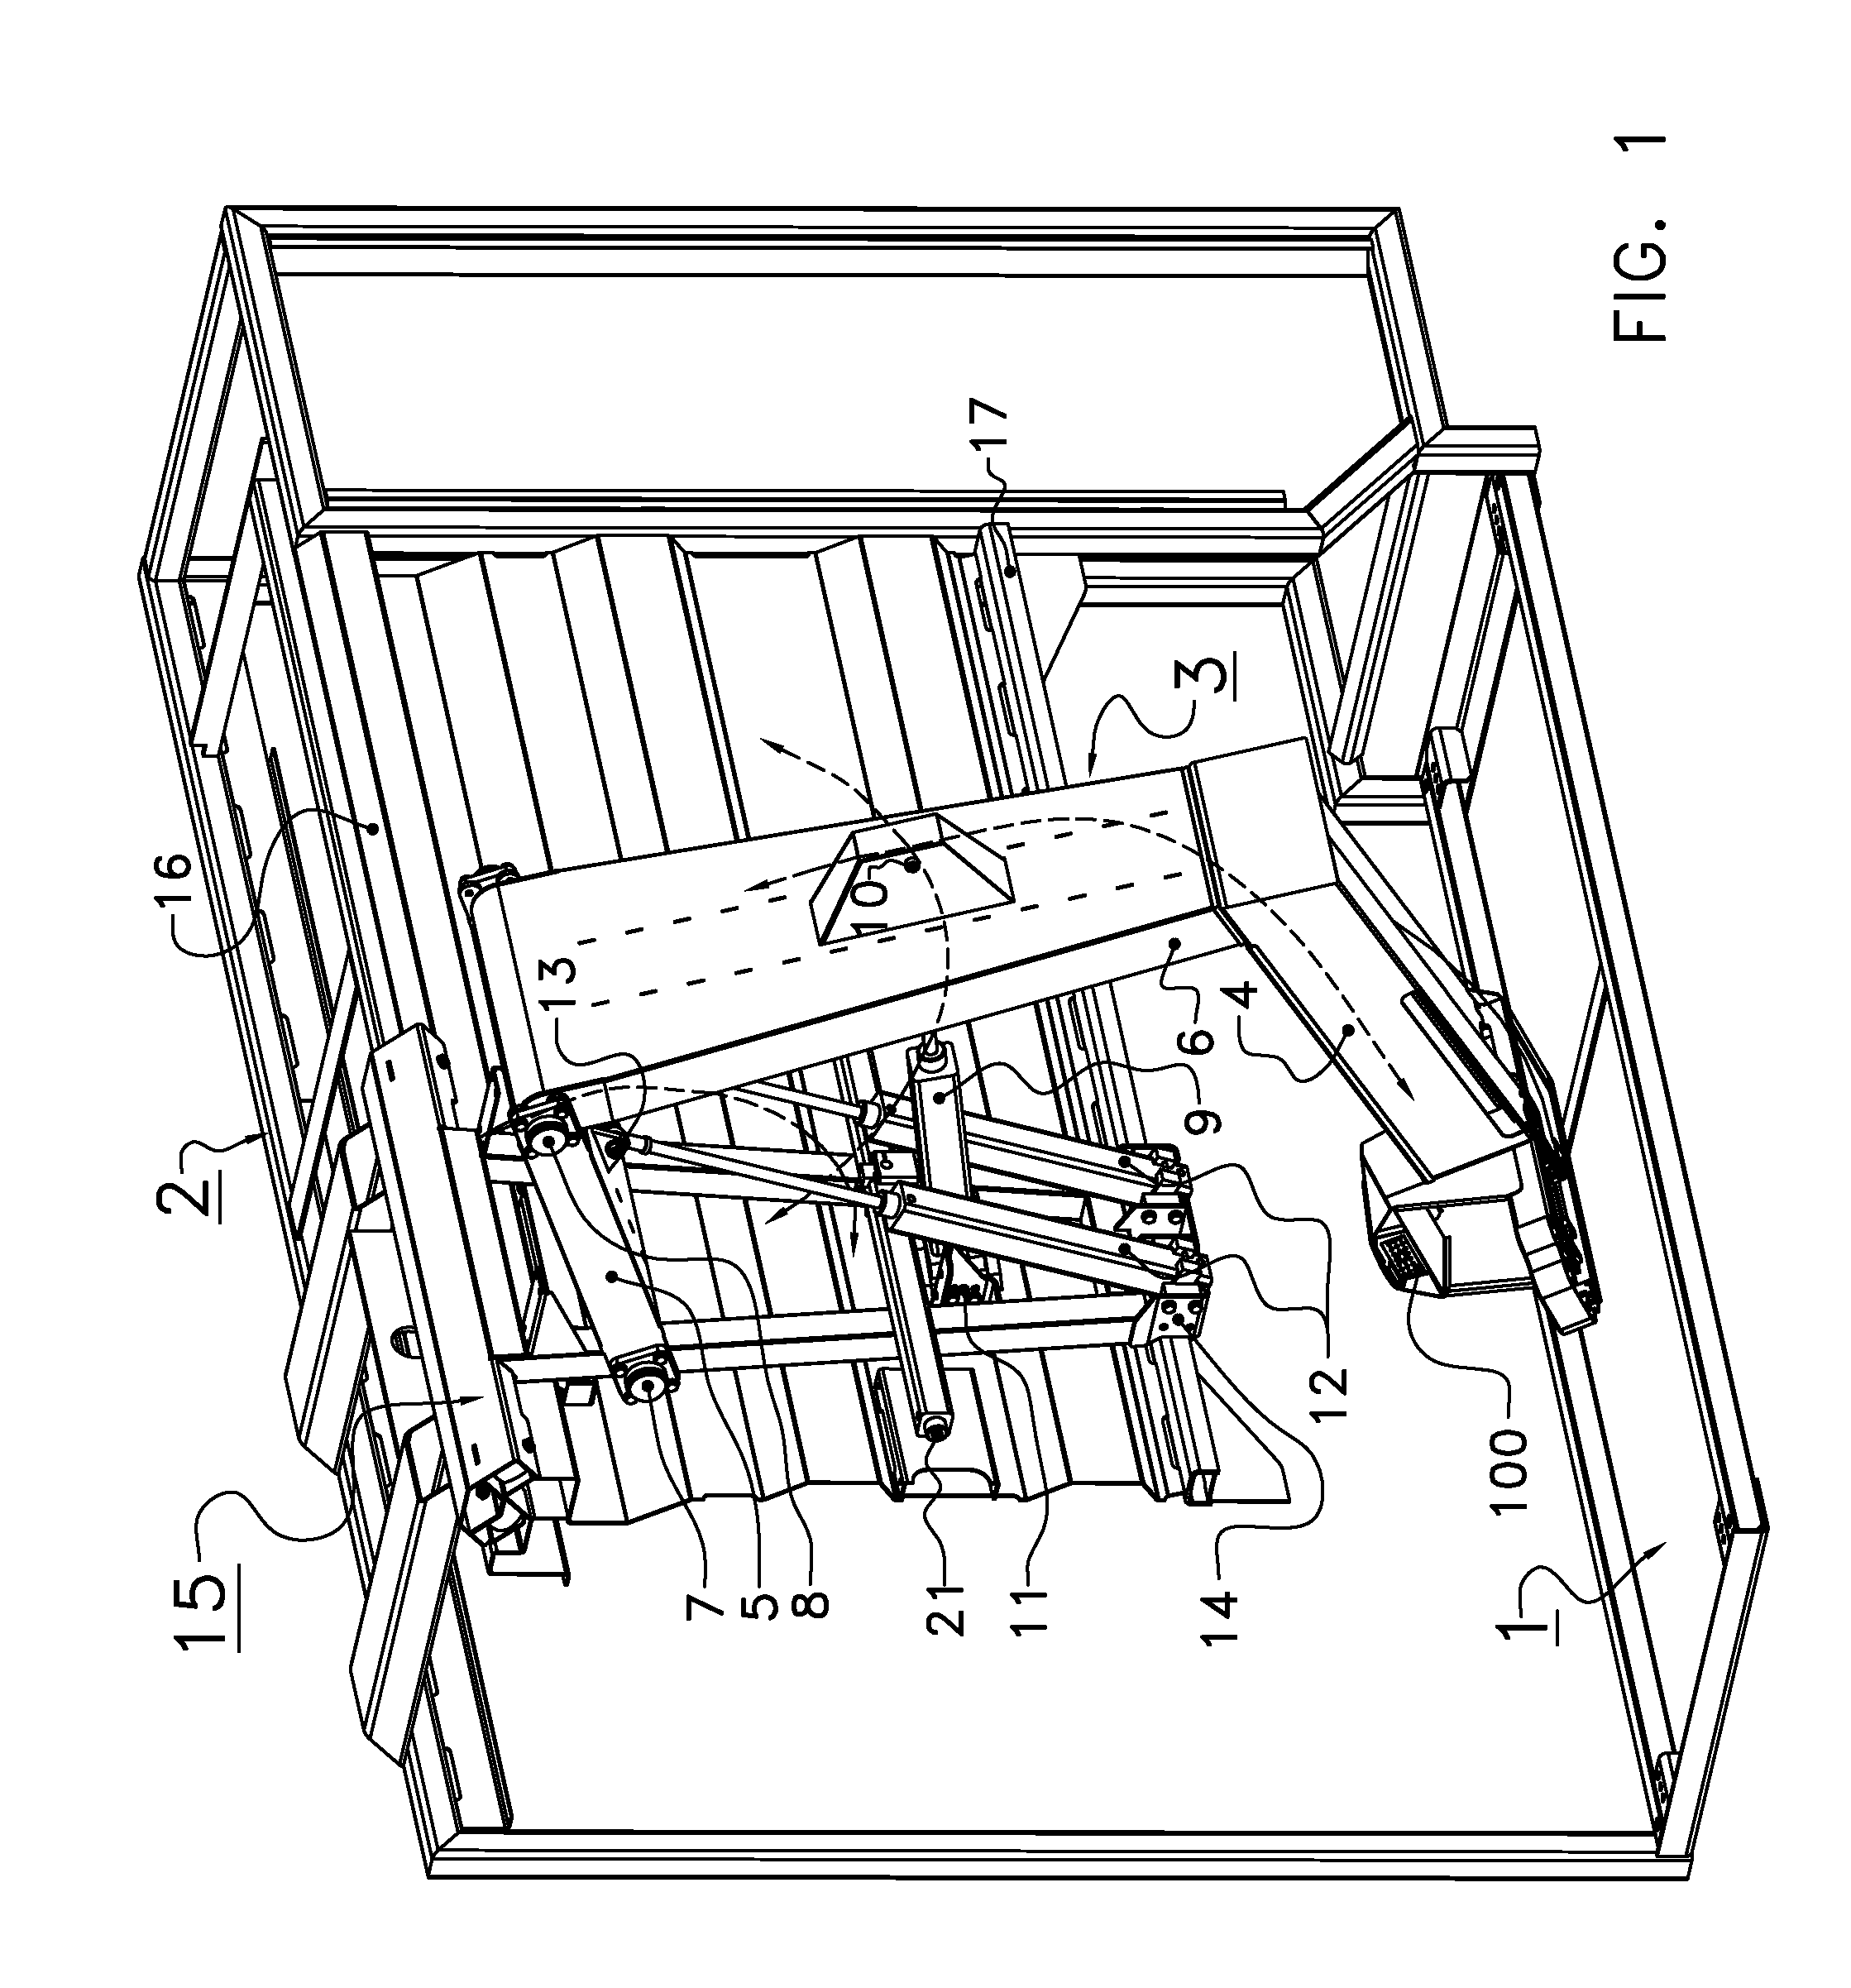 Method of controlling a milking implement, a software program for and an implement performing the method